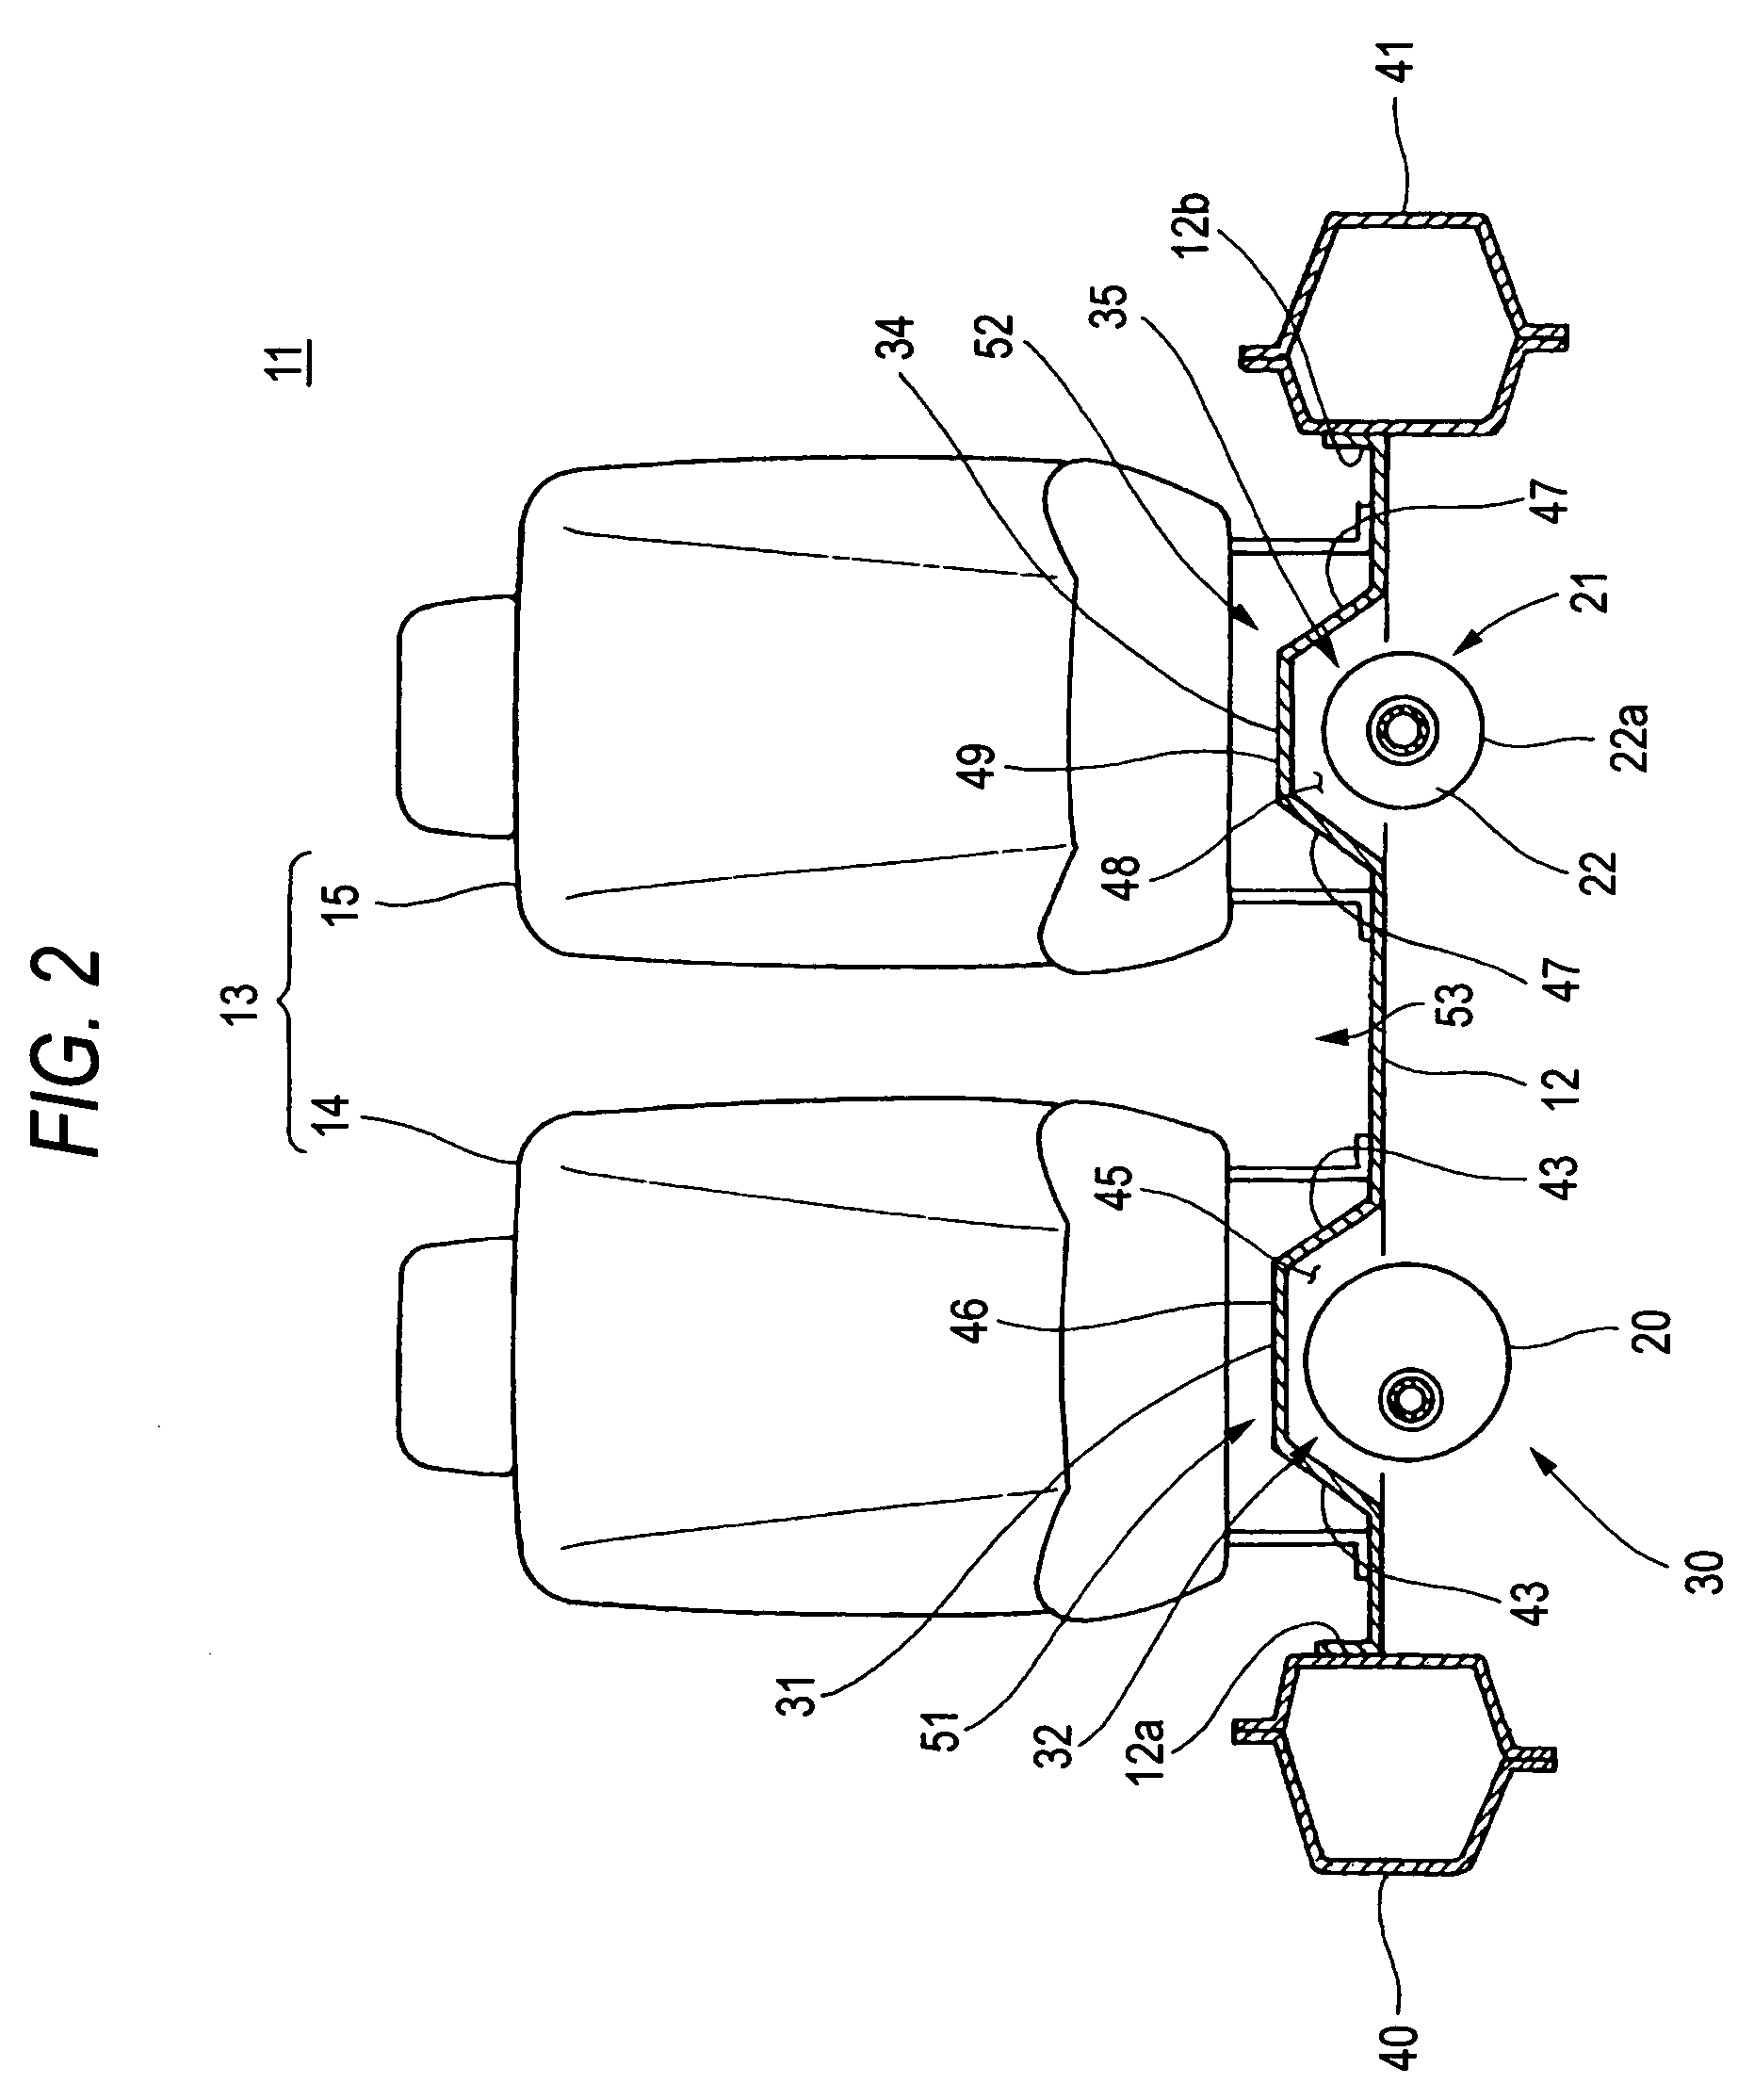 Vehicle canister arranging structure